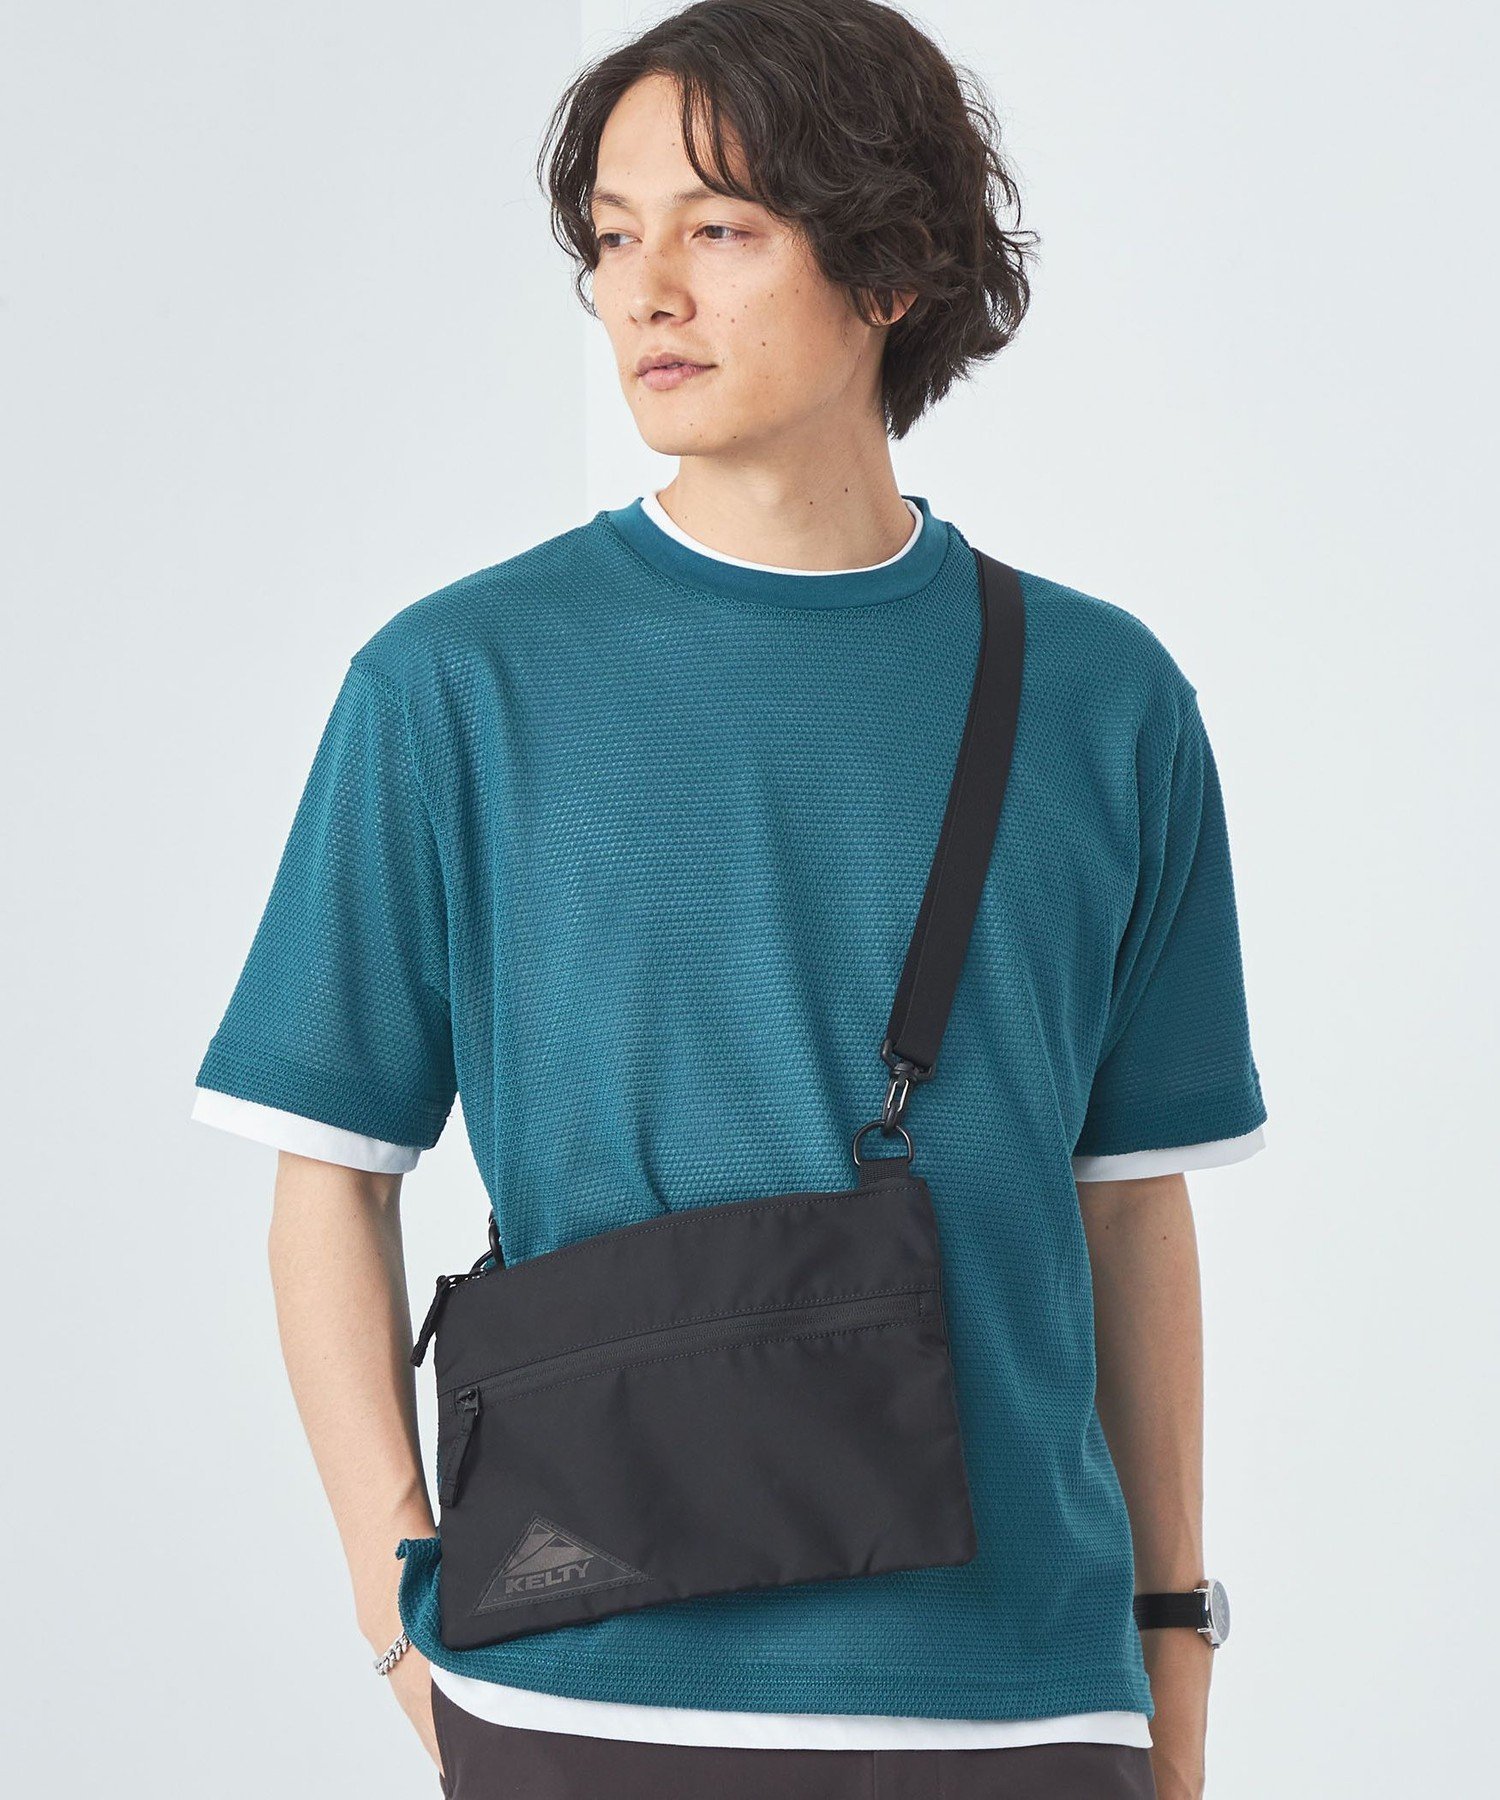 green label relaxing バッグ メンズ UNITED ARROWS green label relaxing 【別注】＜KELTY＞GLR アーバン フラットポーチ ユナイテッドアローズ グリーンレーベルリラクシング バッグ その他のバッグ ブラック ブルー【送料無料】